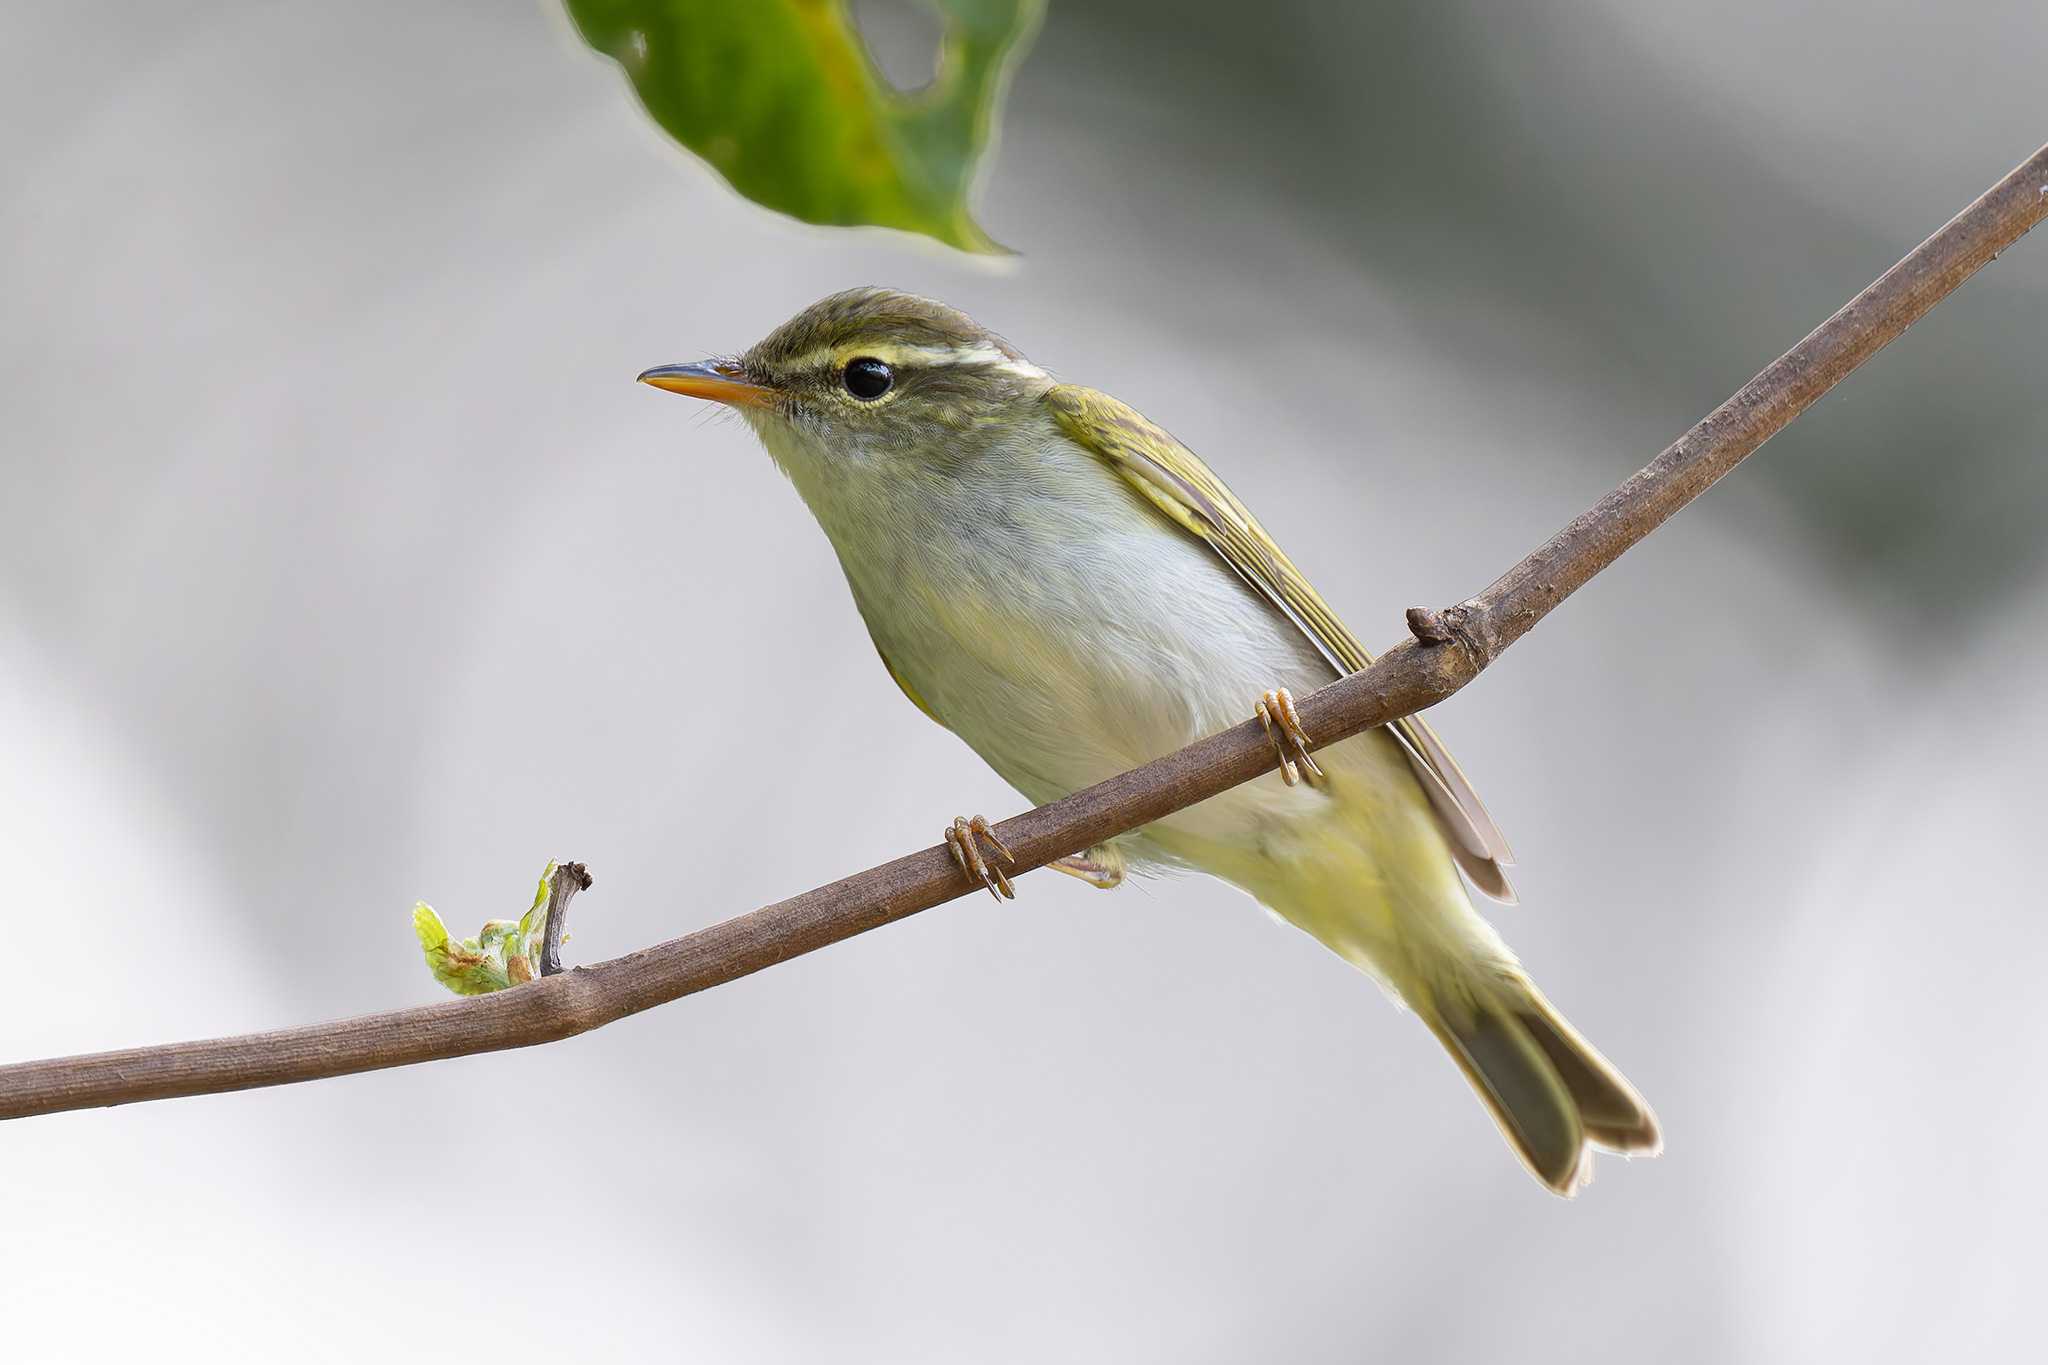 Photo of Eastern Crowned Warbler at 日向渓谷 by たい焼きの煮付け